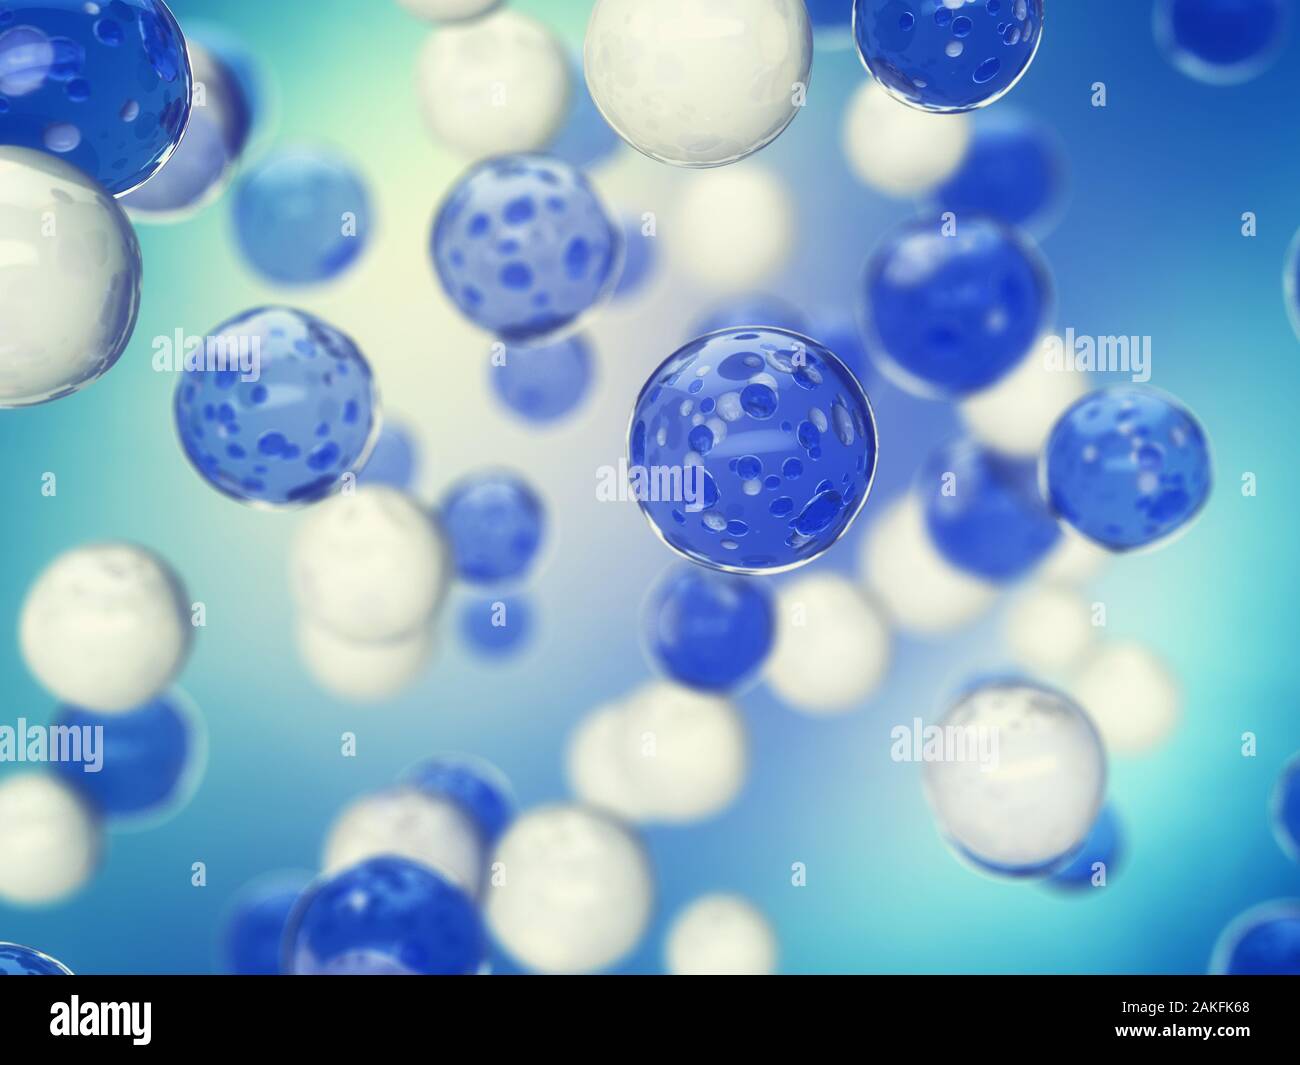 Hyaluronic acid droplets, Skin care and anti-age treatment,3d illustration Stock Photo